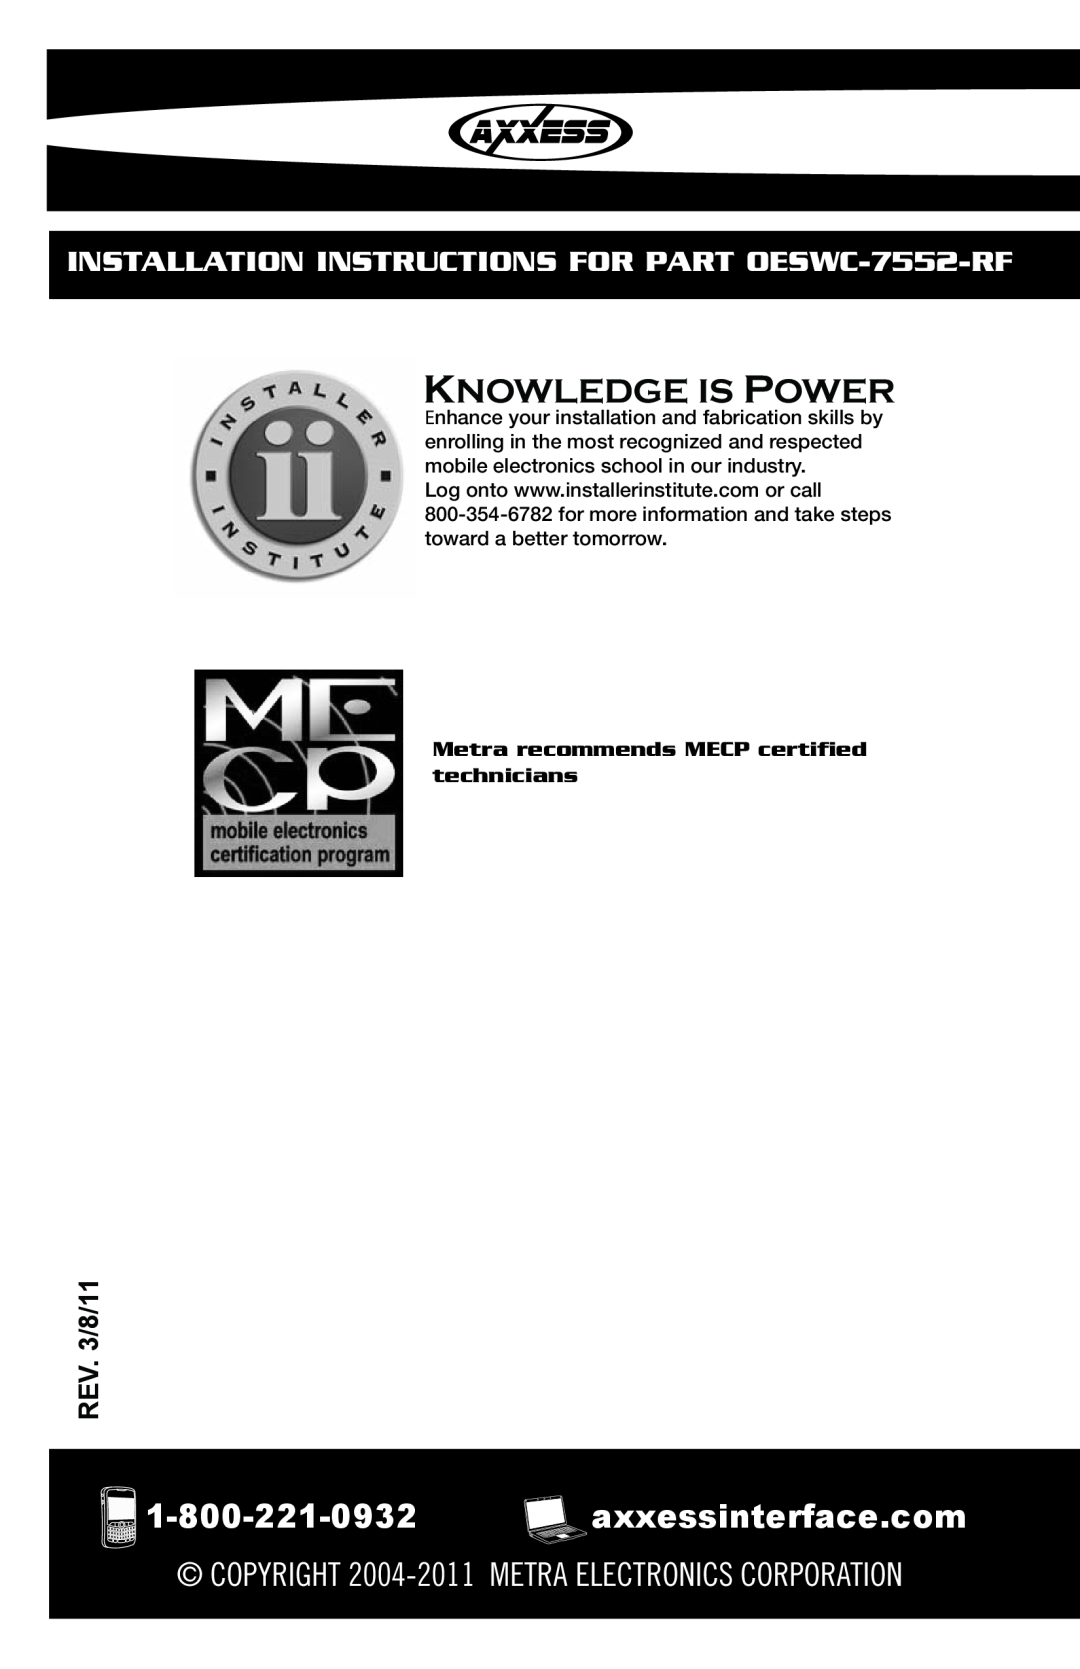 Axxess Interface Knowledge Is Power, INSTALLATION INSTRUCTIONS FOR PART OESWC-7552-RF, REV. 3/8/11 